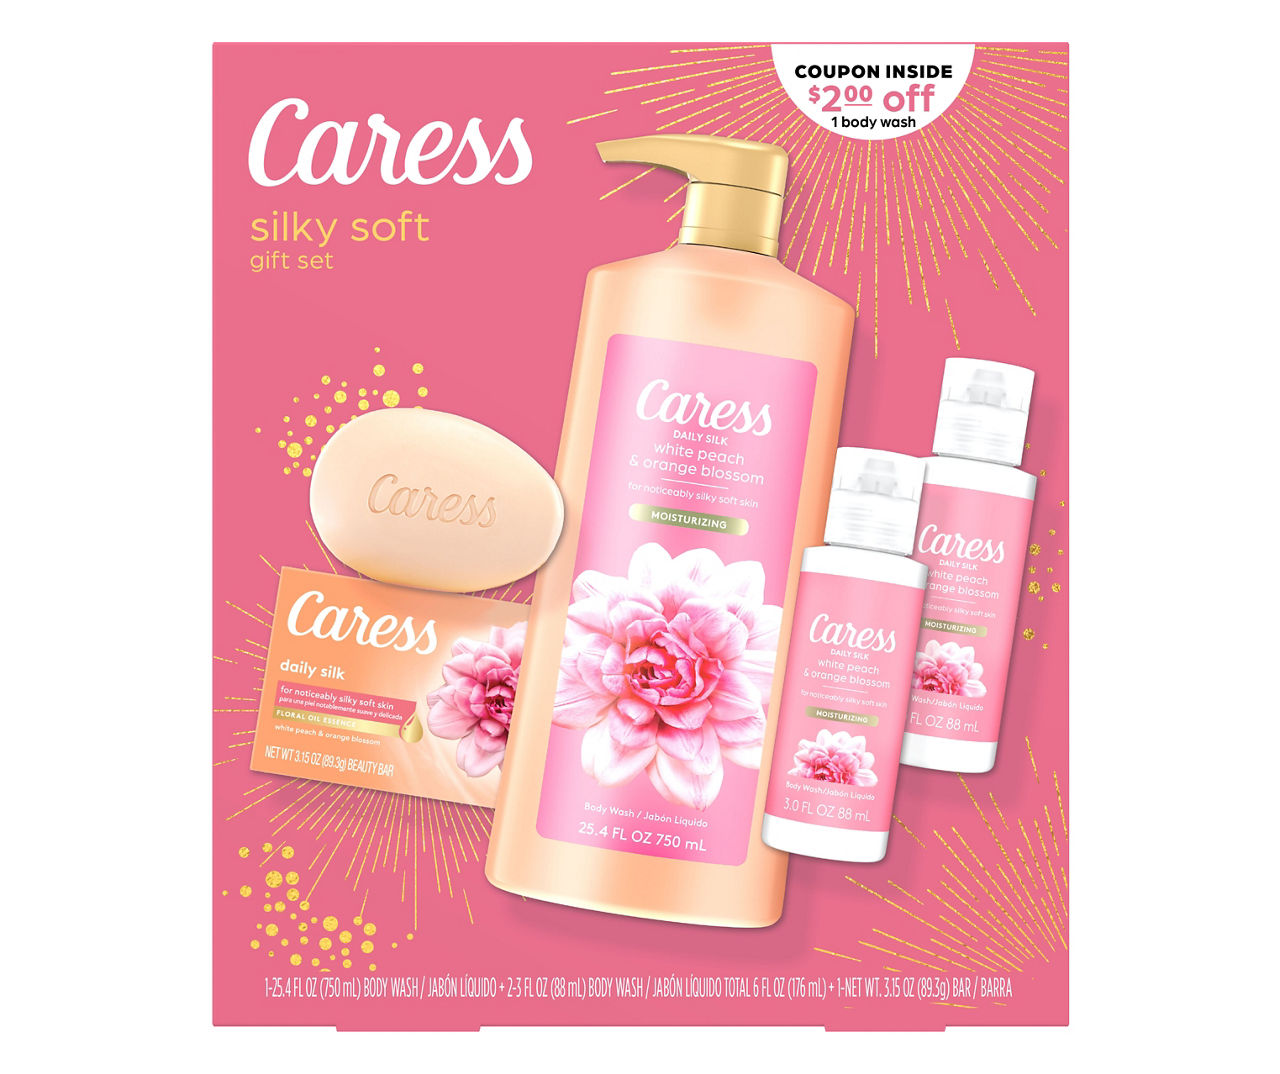 Caress Soap Scents Body Spray, Lotion, Perfume & More